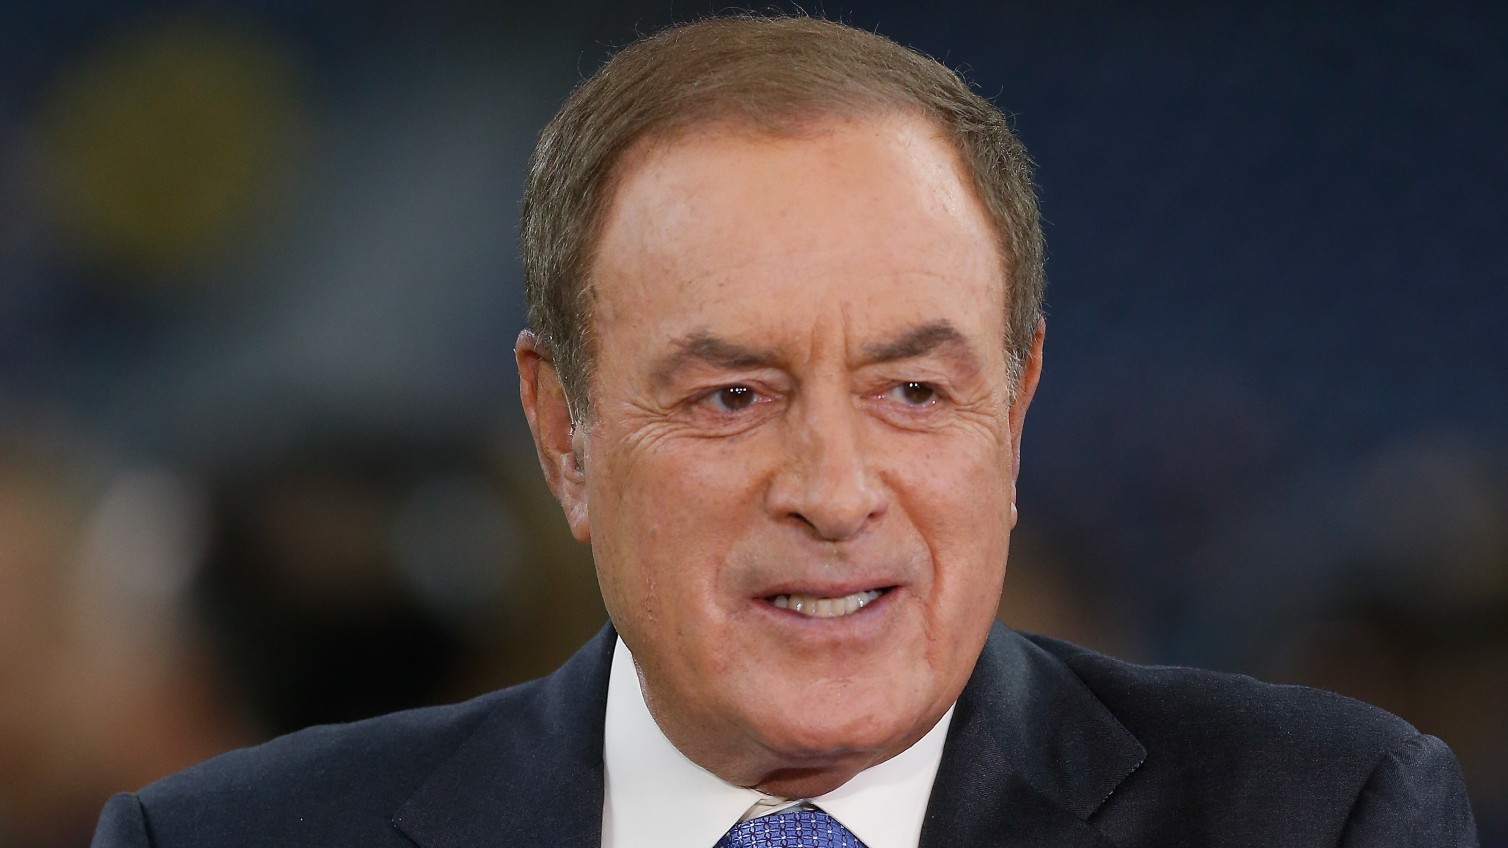 NBC removes Al Michaels from NFL playoffs coverage